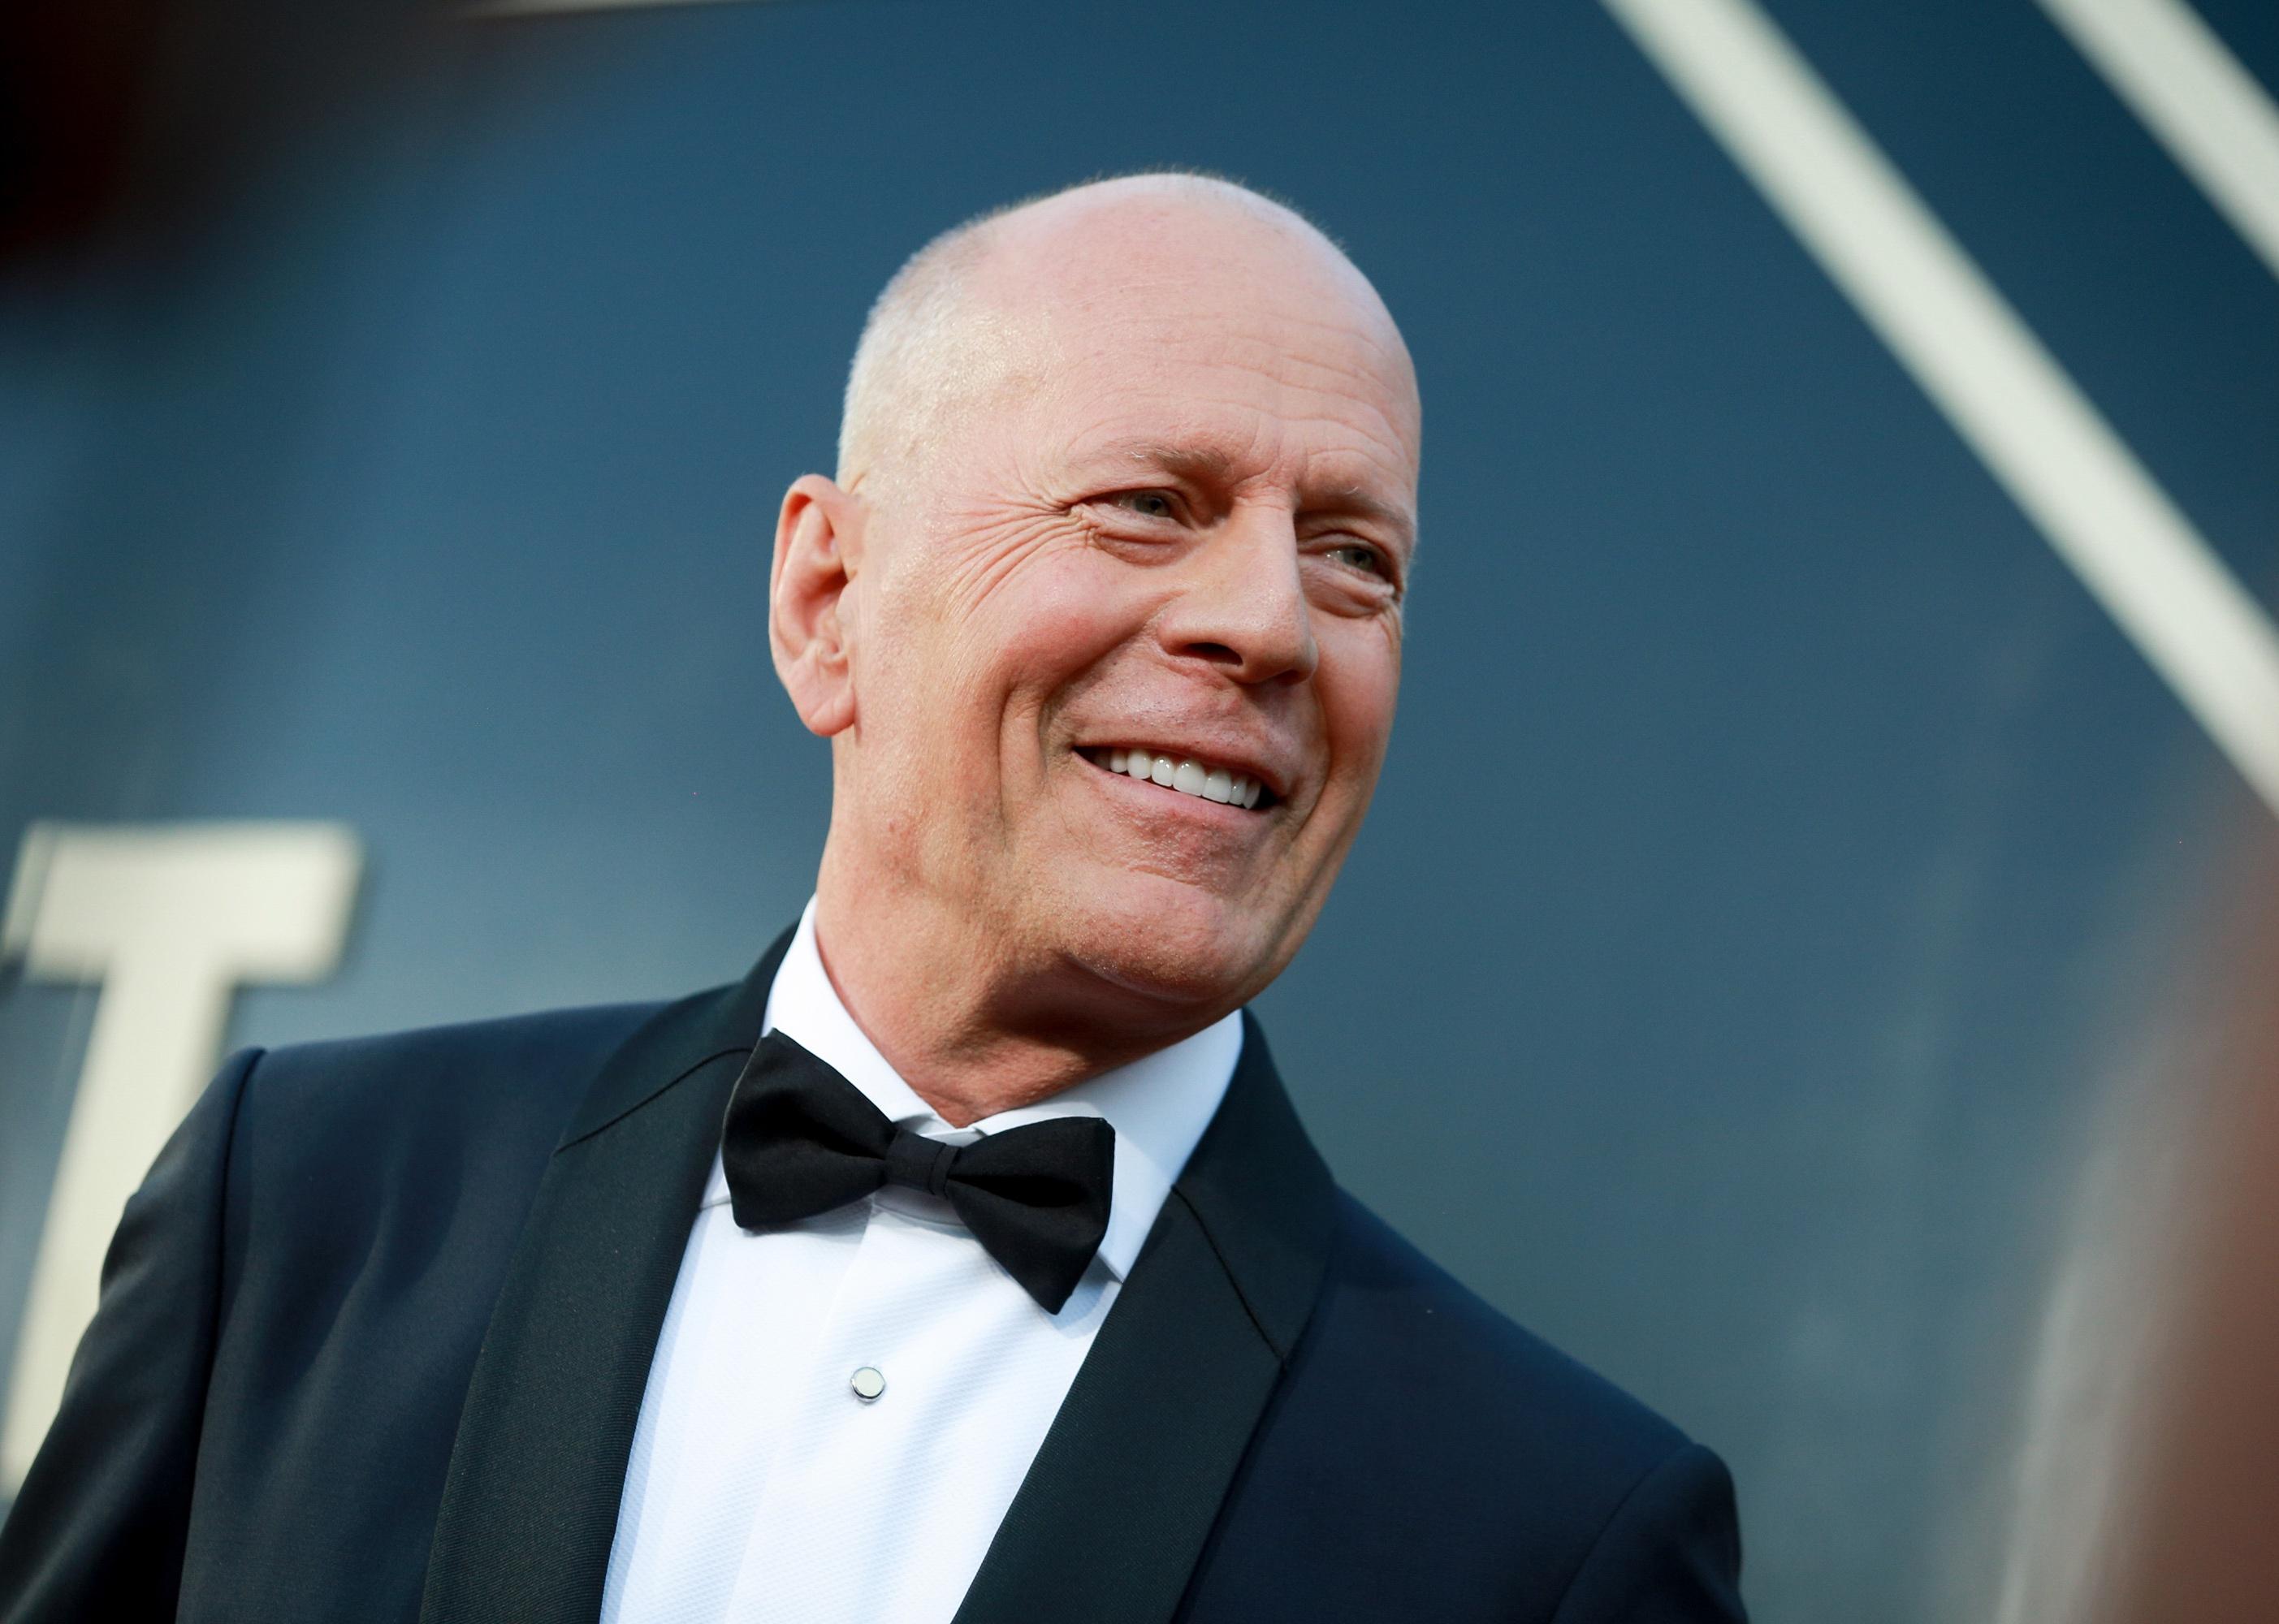 Bruce Willis attends the Comedy Central Roast of Bruce Willis.